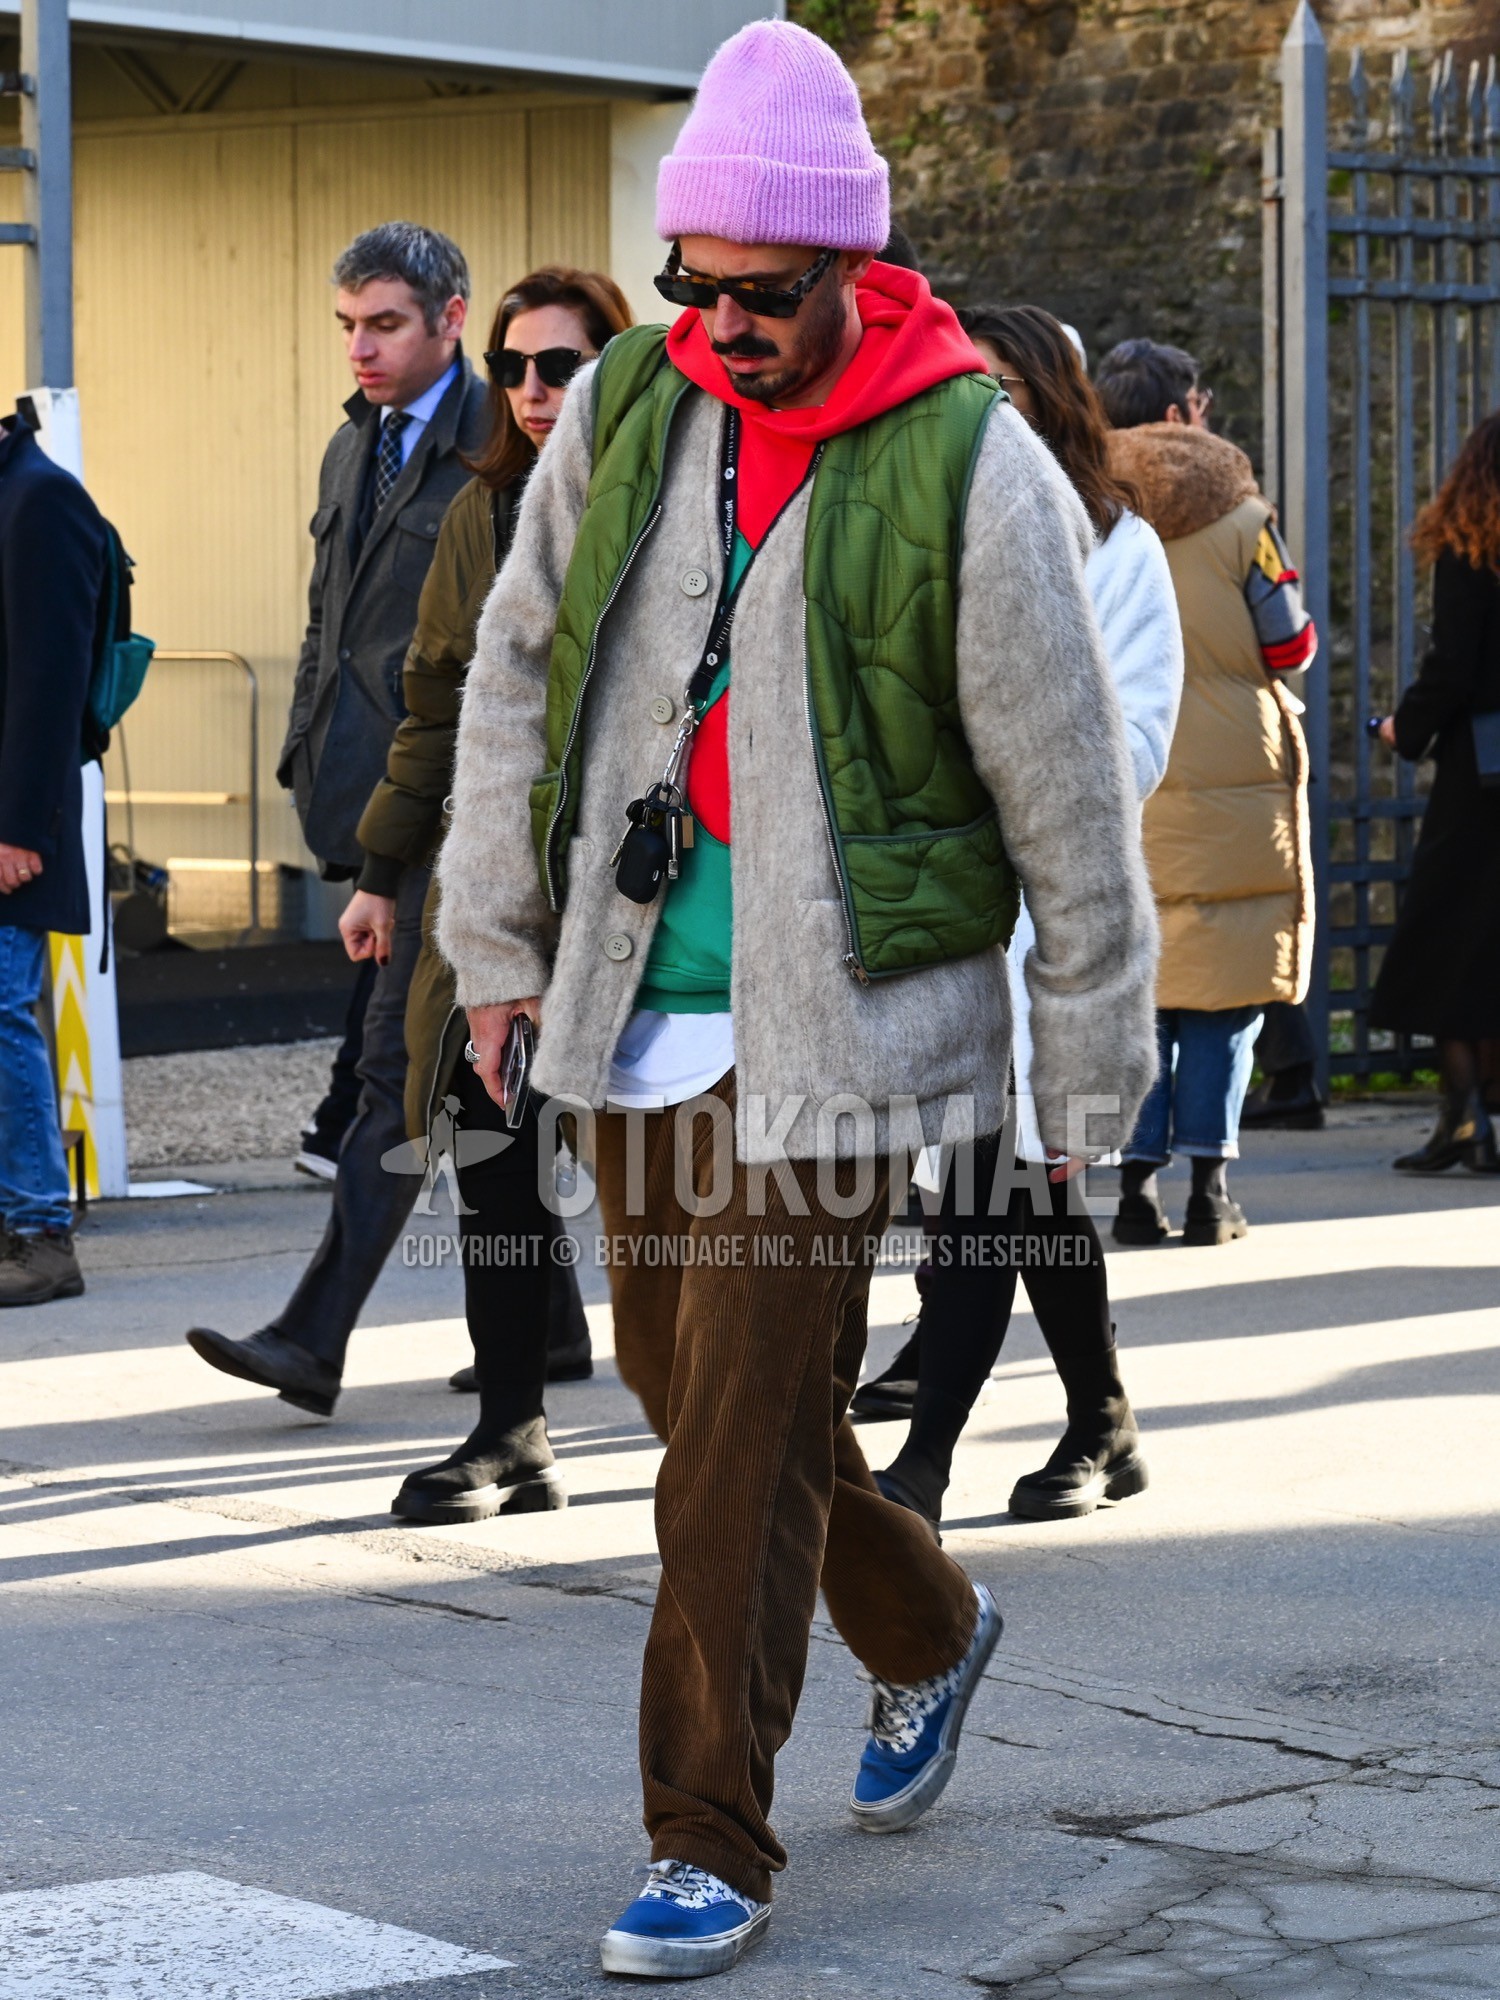 Men's autumn winter outfit with pink plain knit cap, brown tortoiseshell sunglasses, olive green plain quilted jacket, red plain hoodie, gray plain cardigan, brown plain winter pants (corduroy,velour), blue low-cut sneakers.